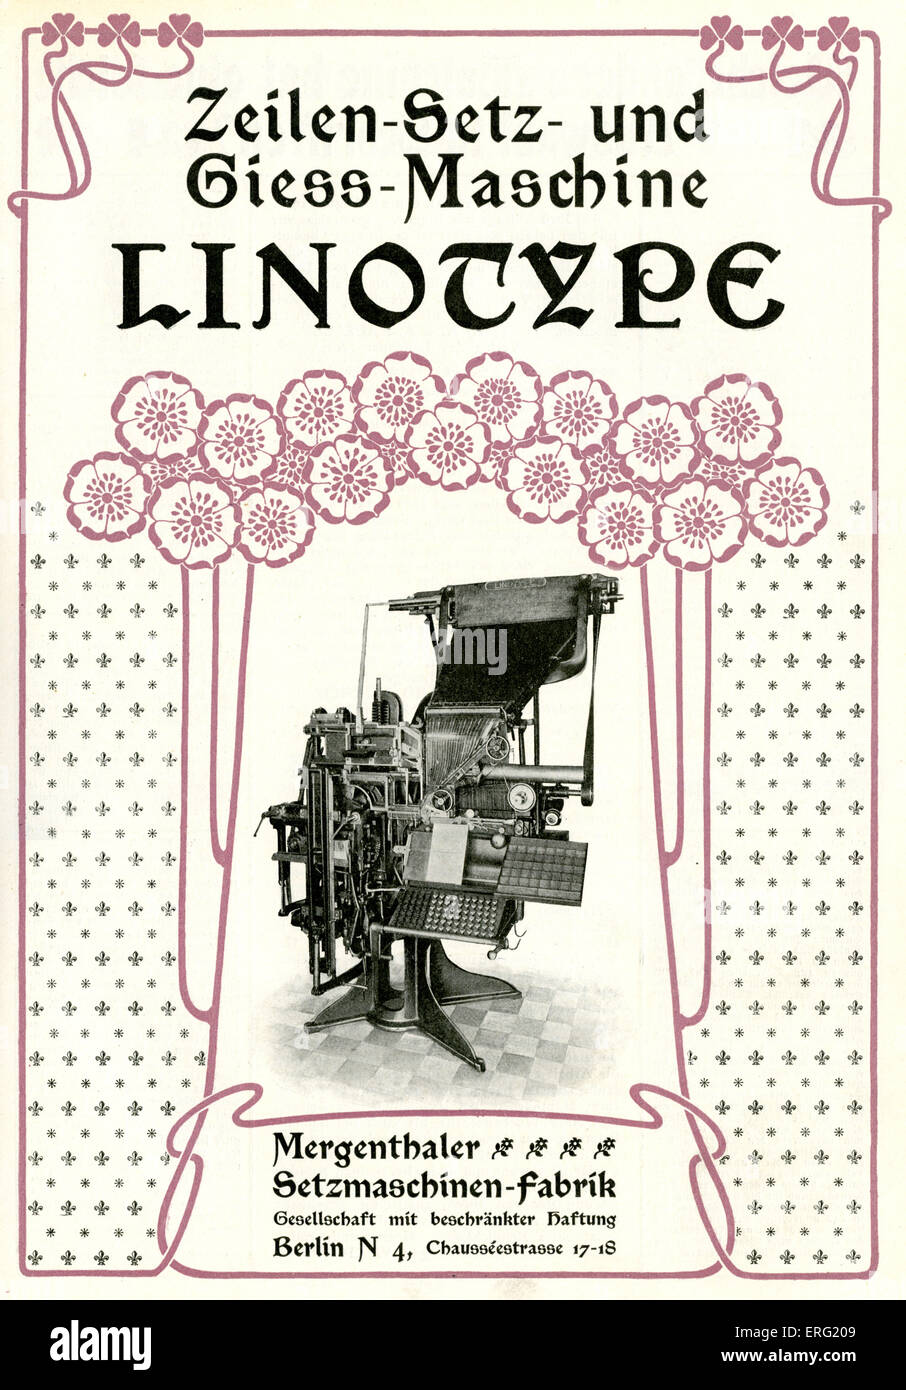 German advert for linotype machines from the Mergenthaler type-setting machine factory, Berlin. From printers' catalogue, 1902. Stock Photo